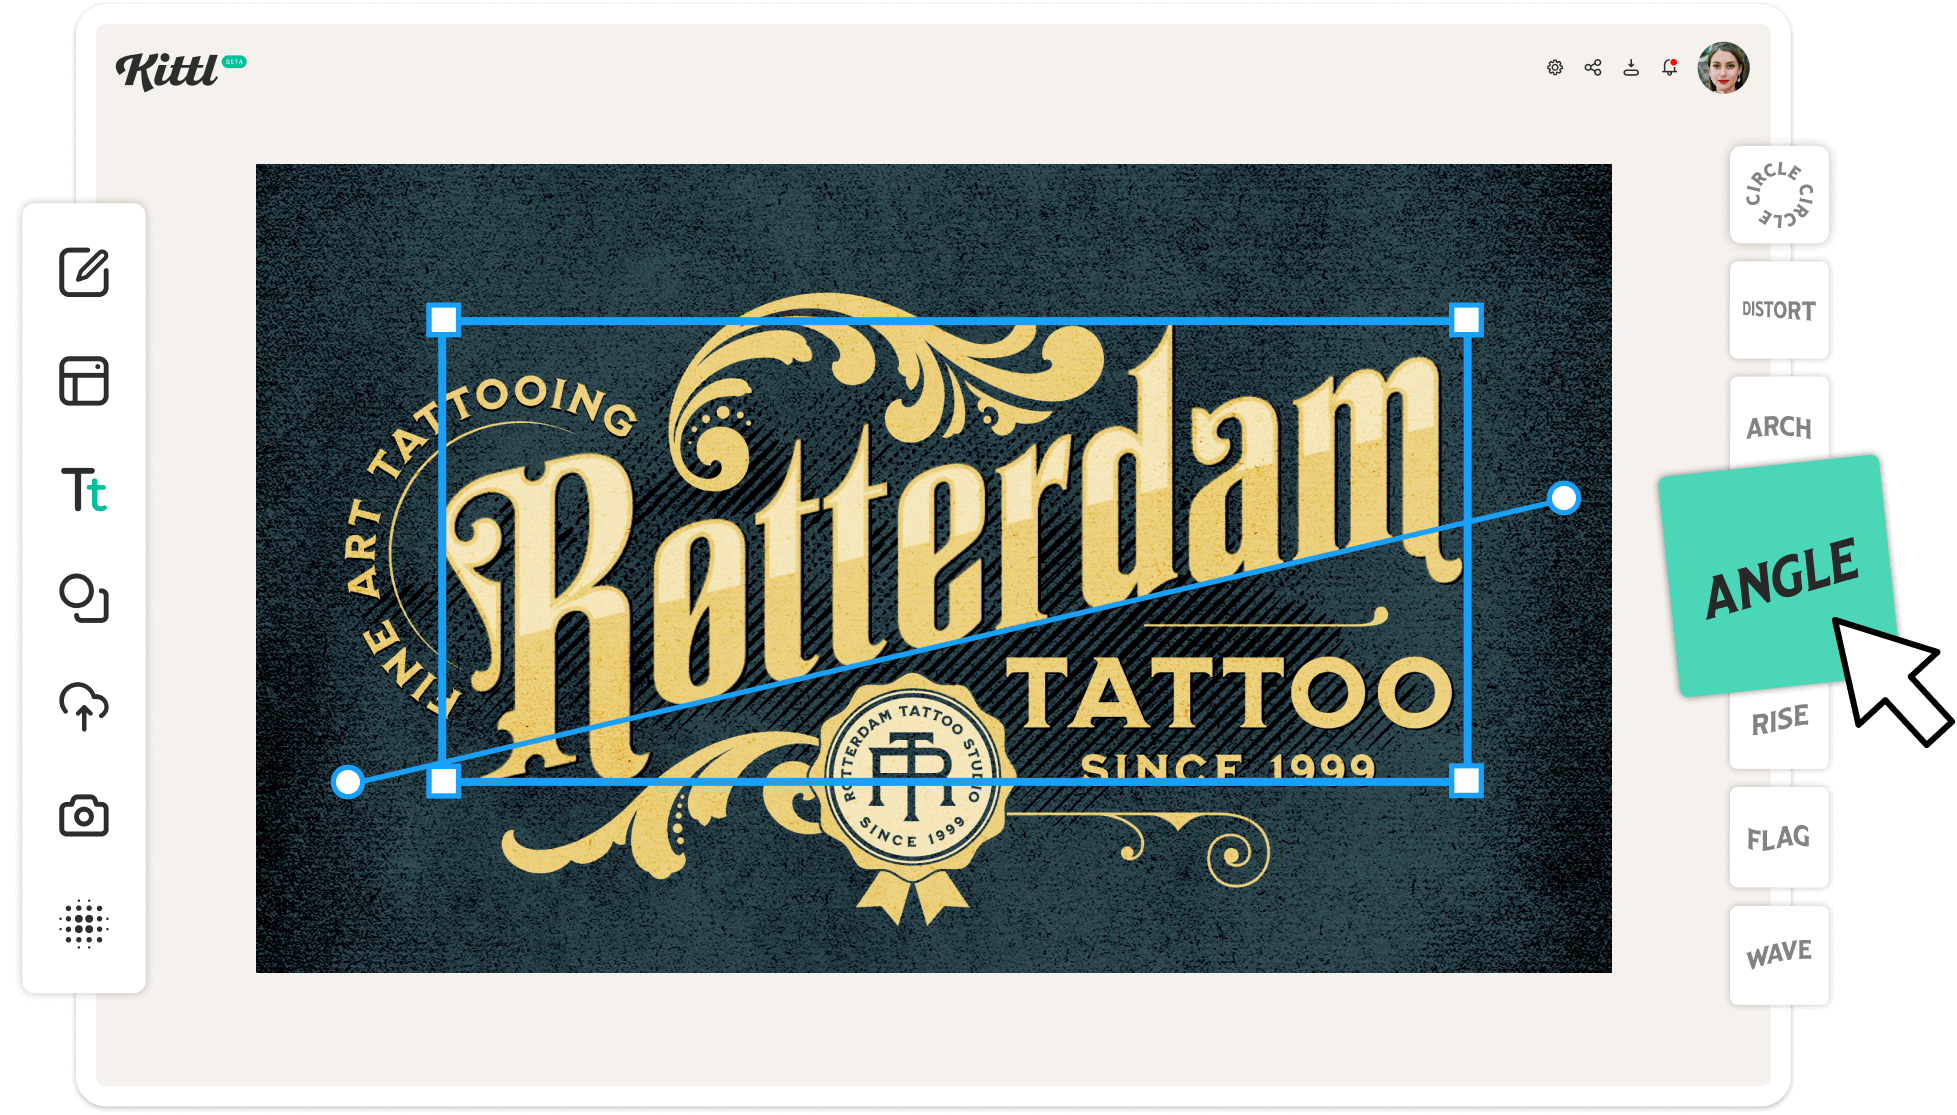 Multiple text transformation options in Kittl. With a sample of angle alignment on a vintage tattoo logo design.